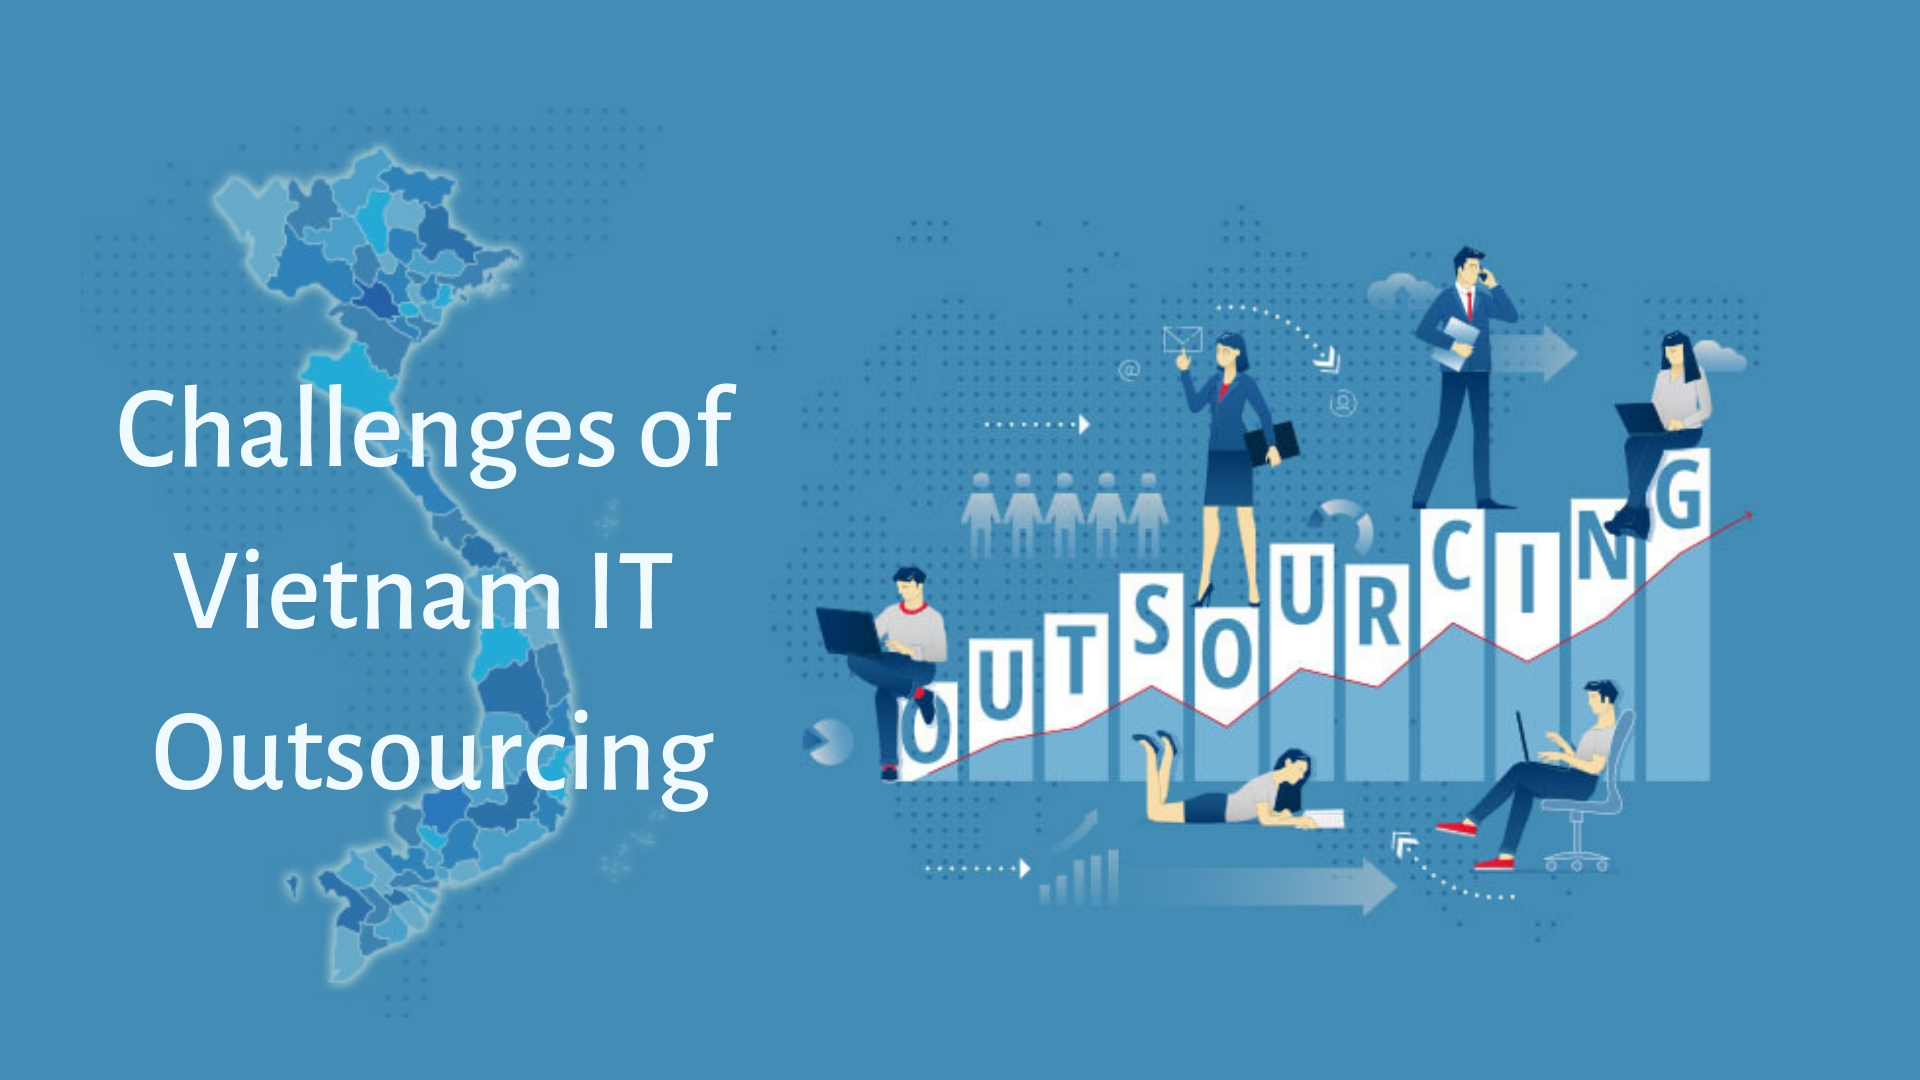 What are the challenges of IT outsourcing that Vietnam has to deal with?